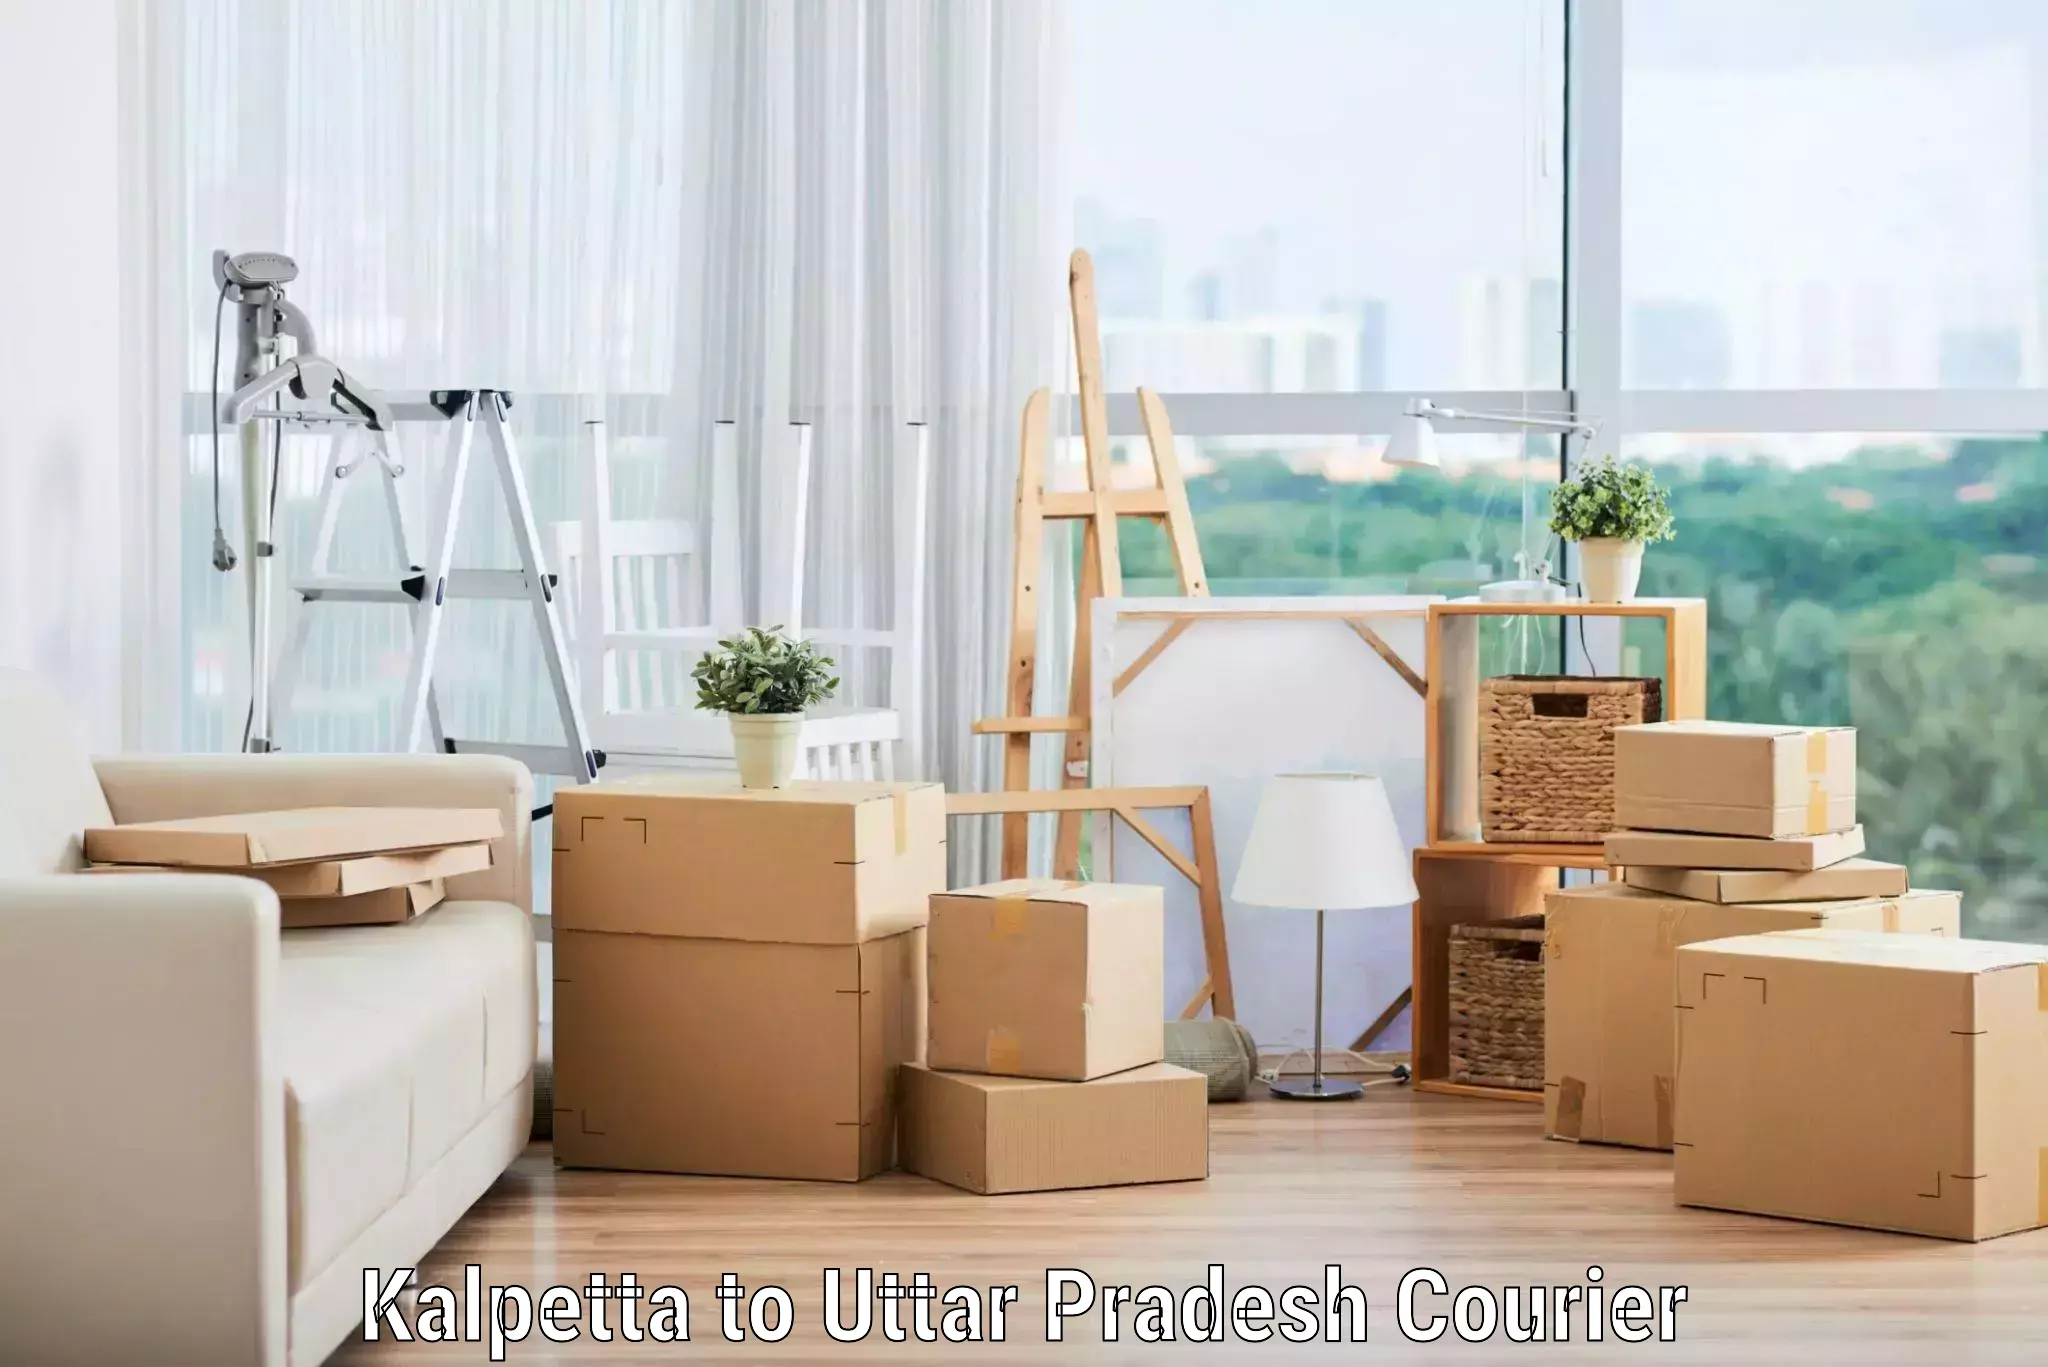 Quality moving and storage Kalpetta to Agra